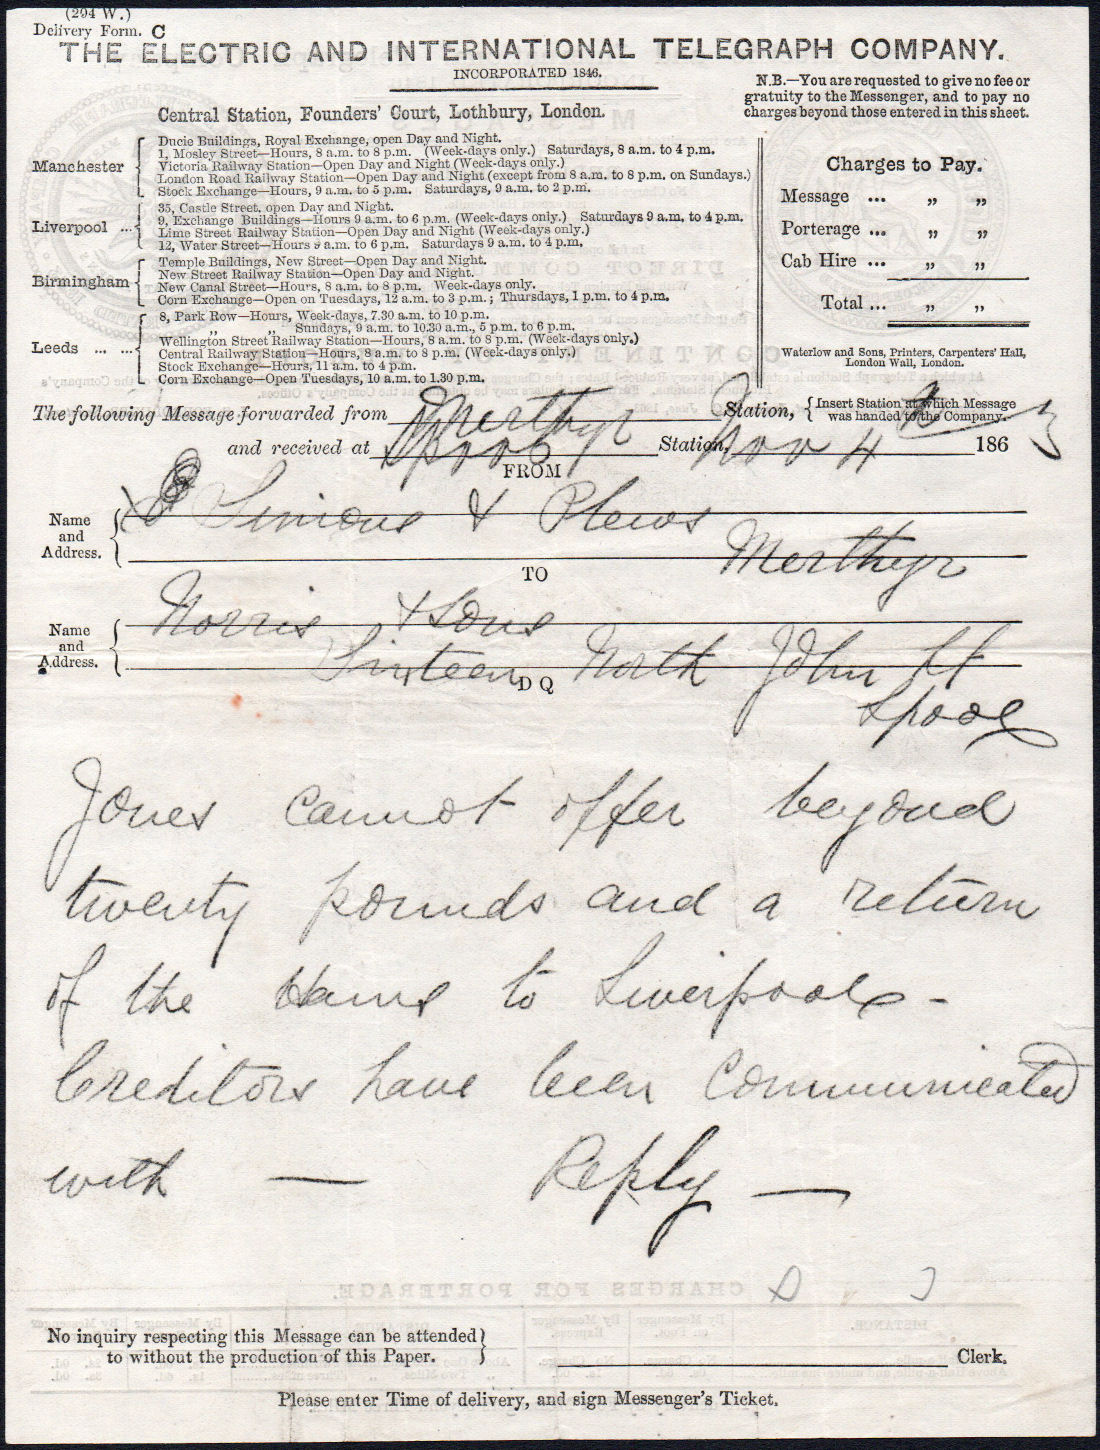 Electric Telegraph Company Form C - front.